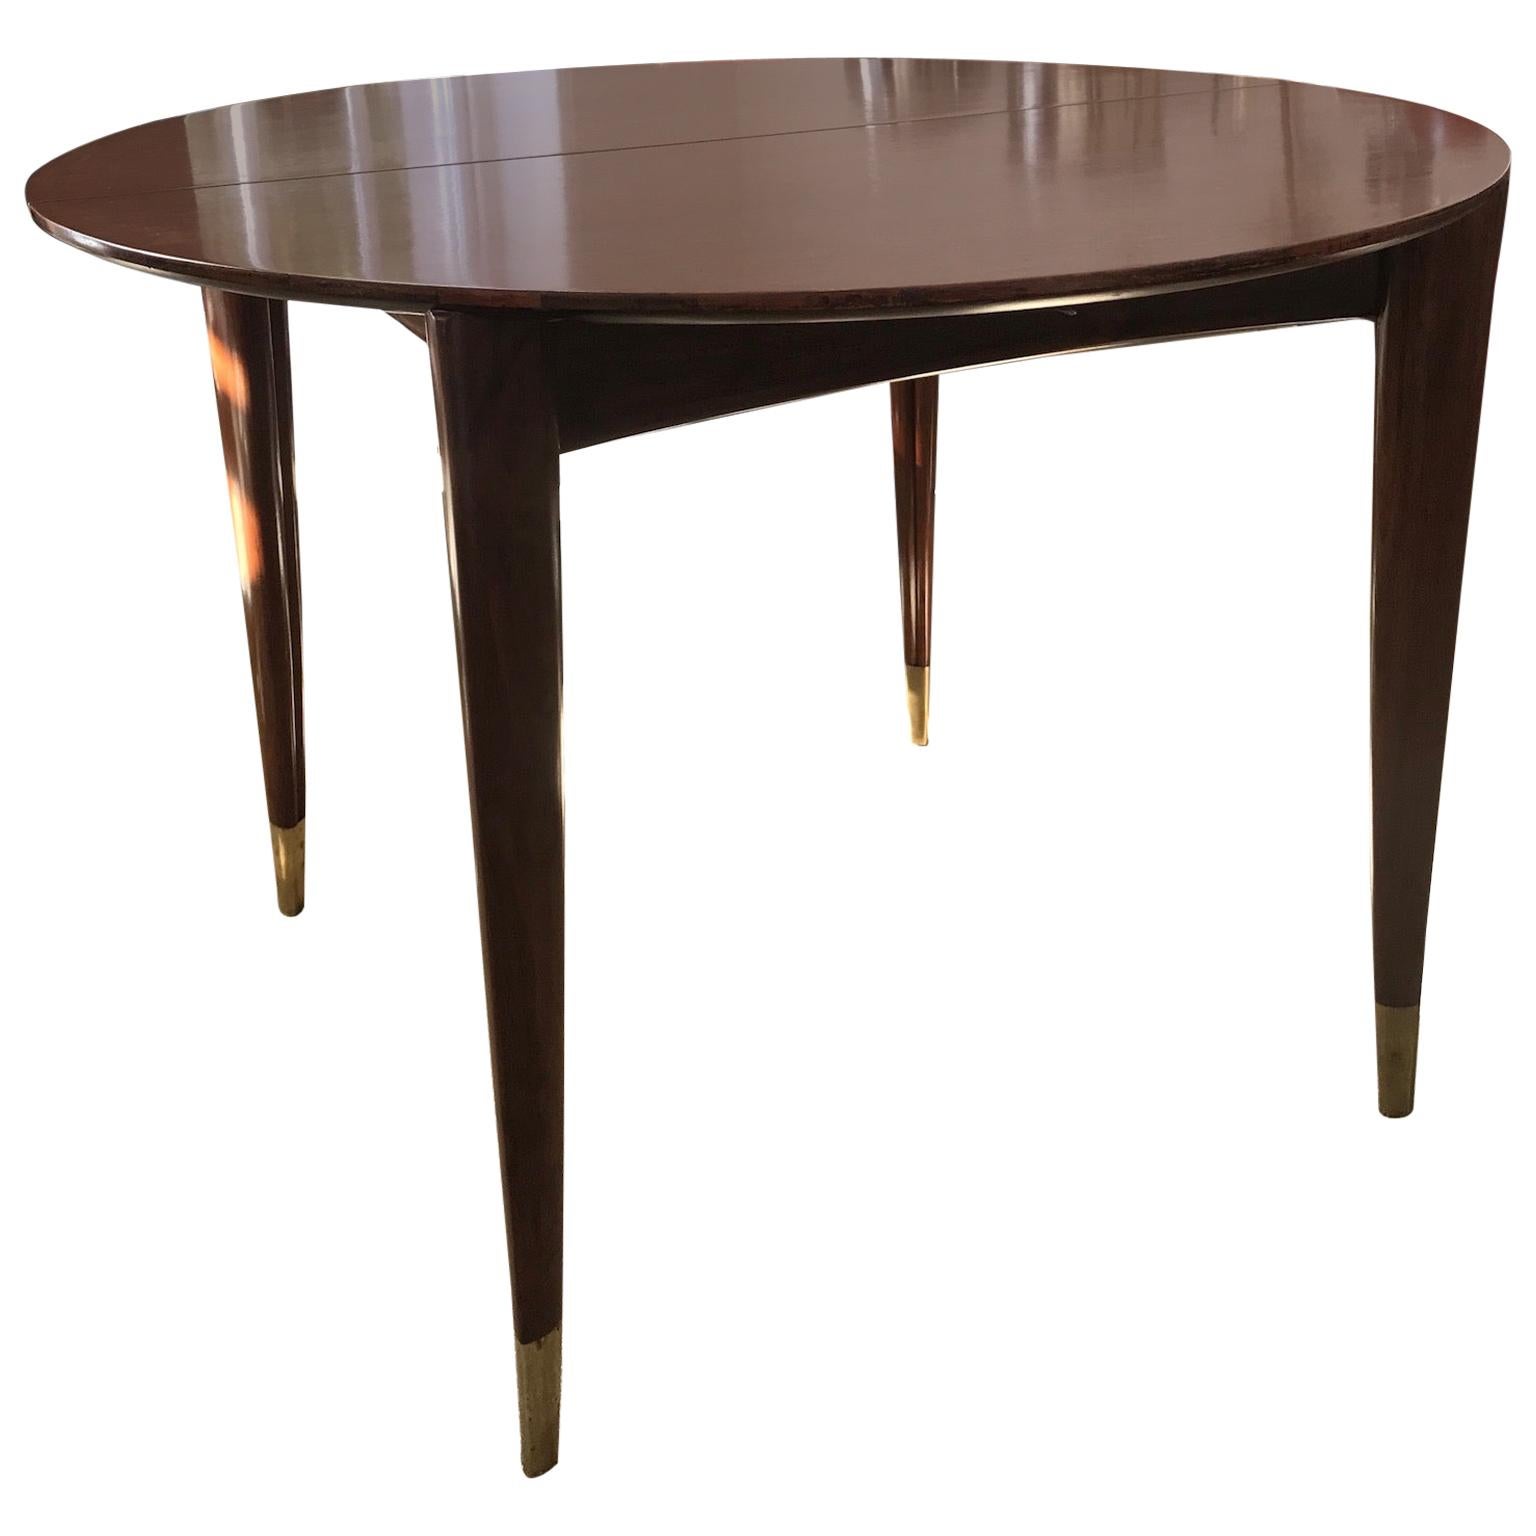 Gio Ponti Dining Table Seats 4 - 10 People For Sale